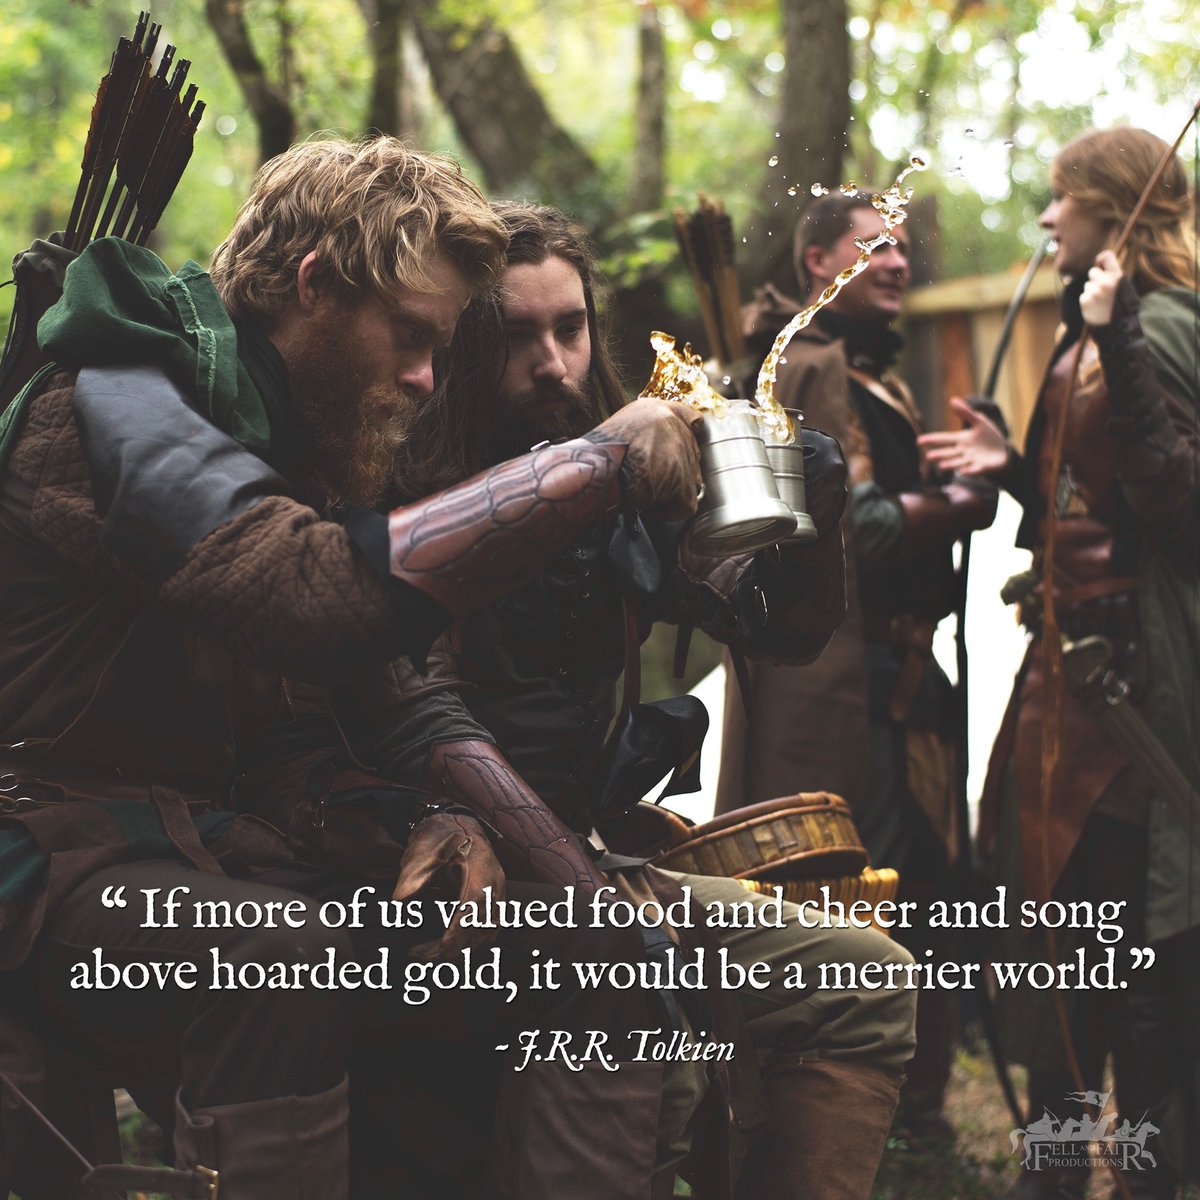 “If more of us valued food and cheer and song above hoarded gold, it would be a merrier world.” #Tolkien